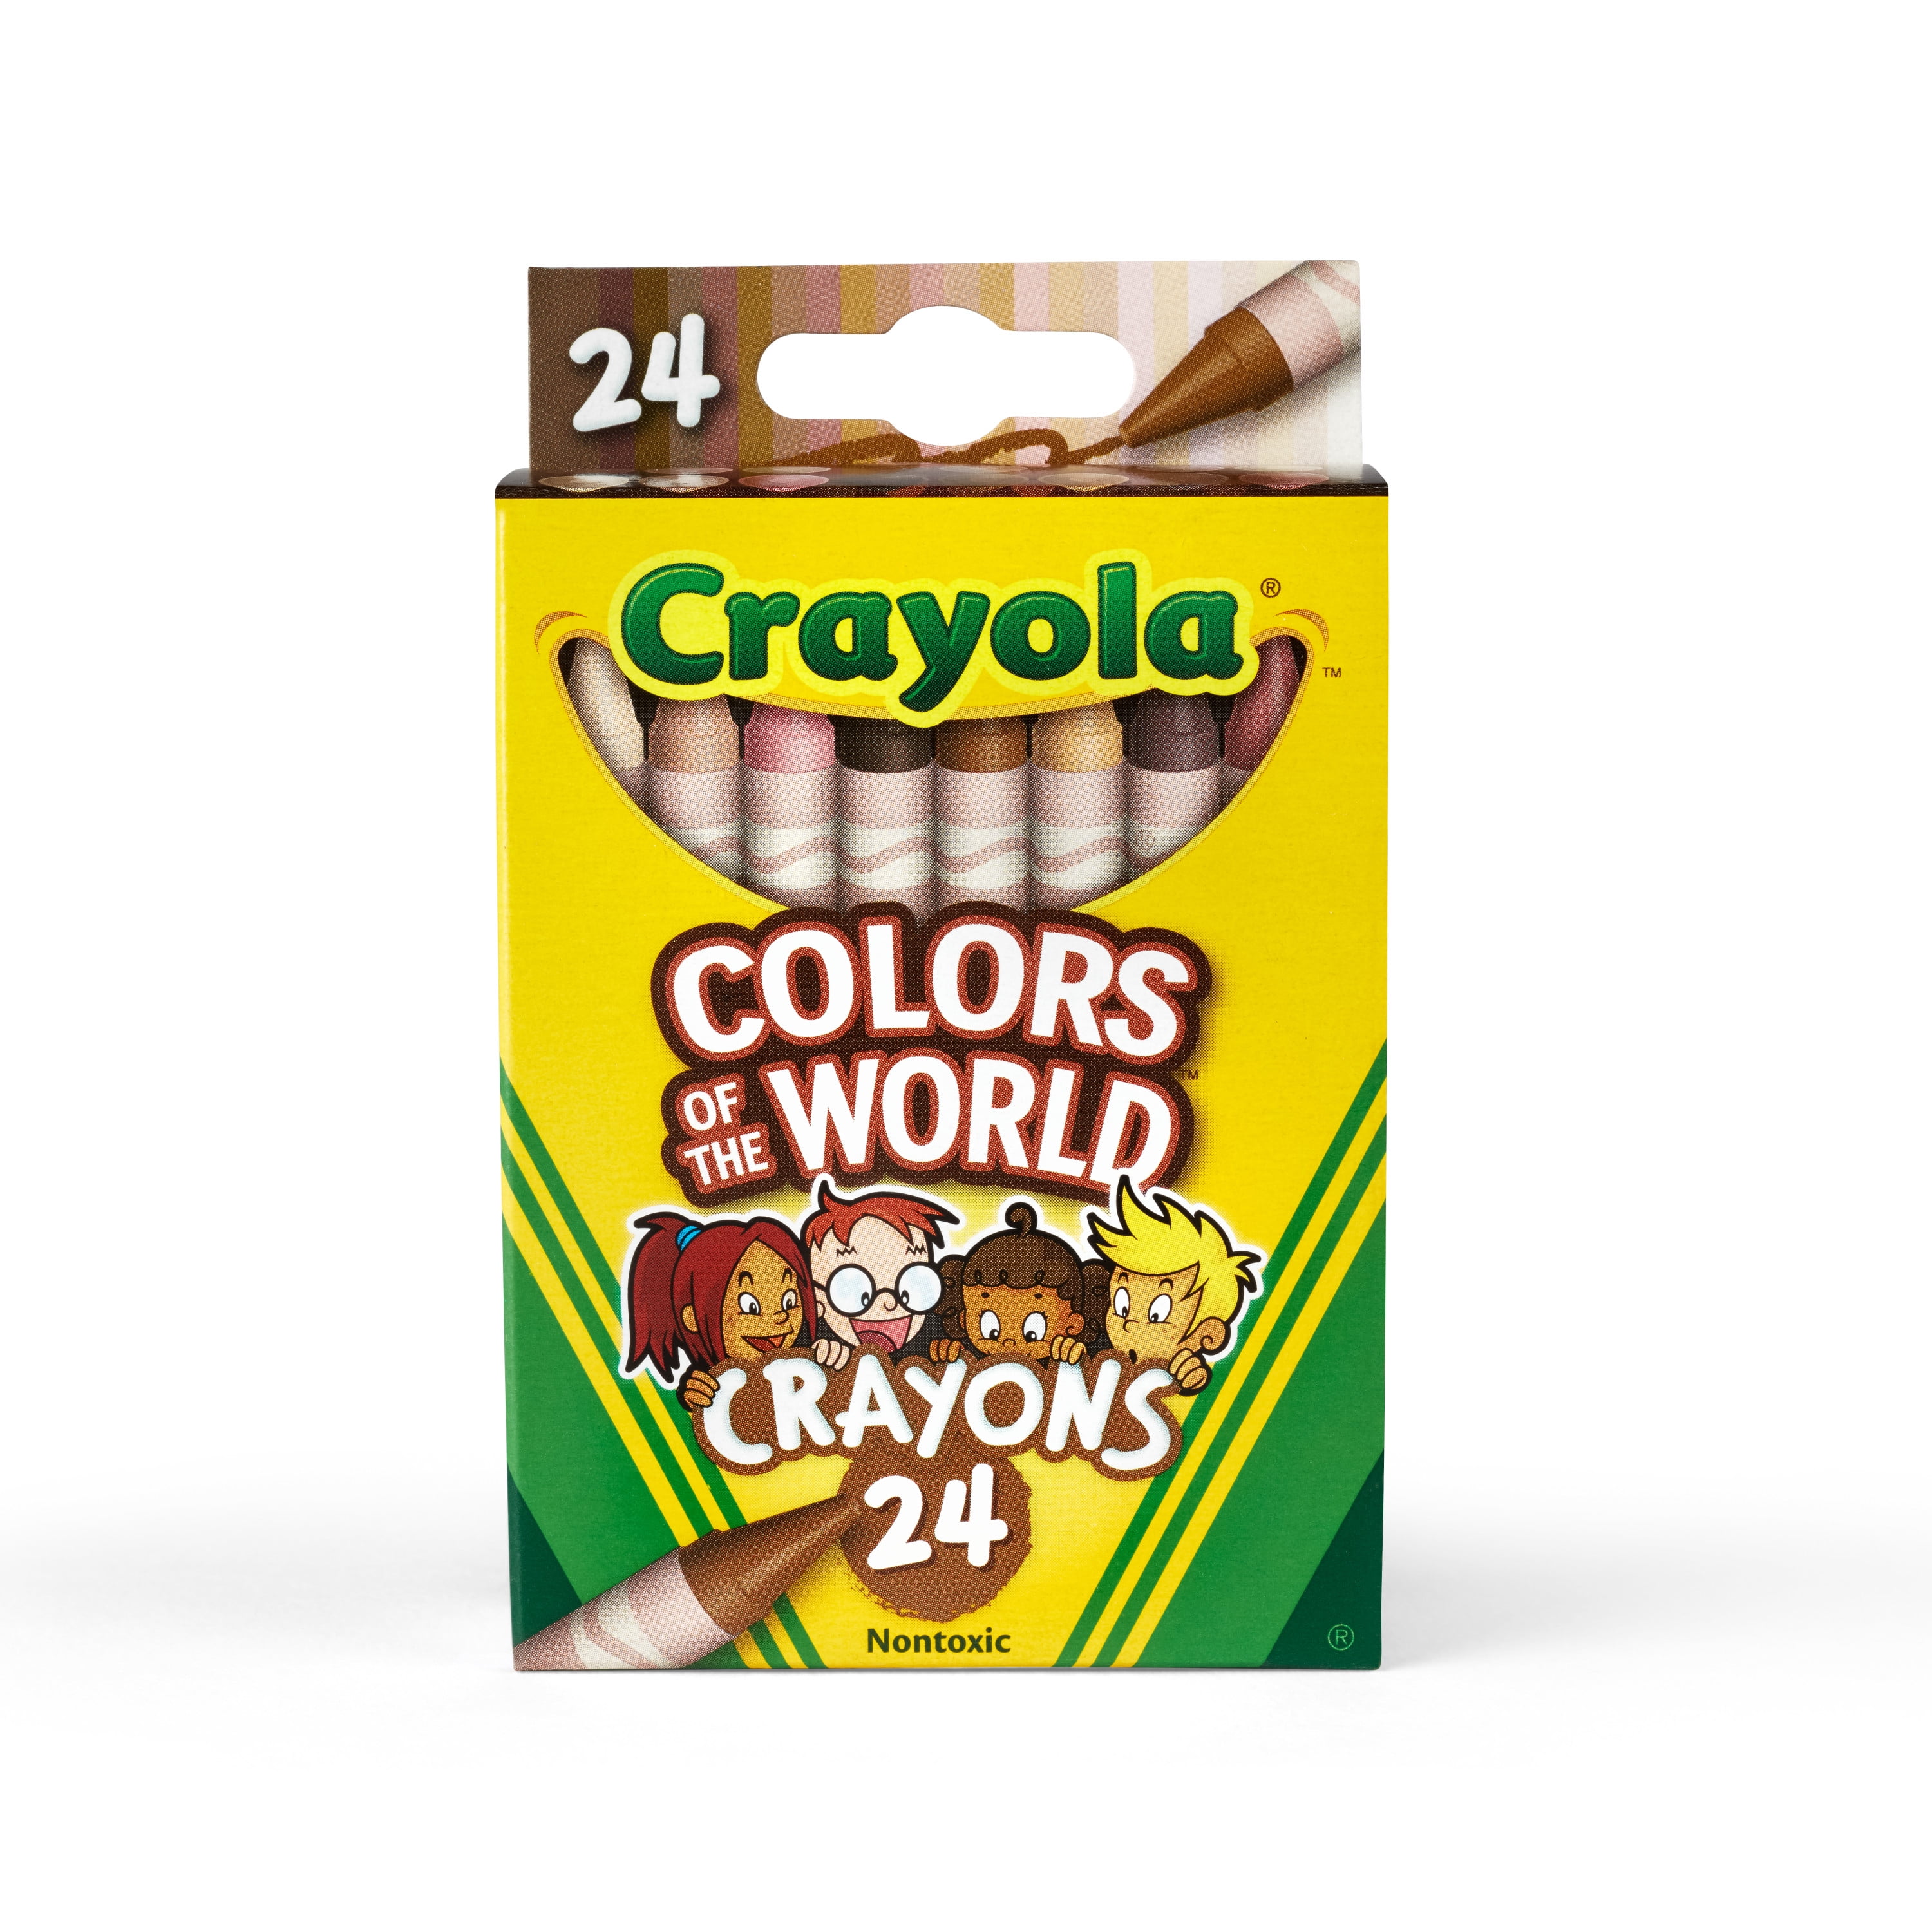 Crayola Colors of the World Crayons, 24 Count Assorted Colors, Child